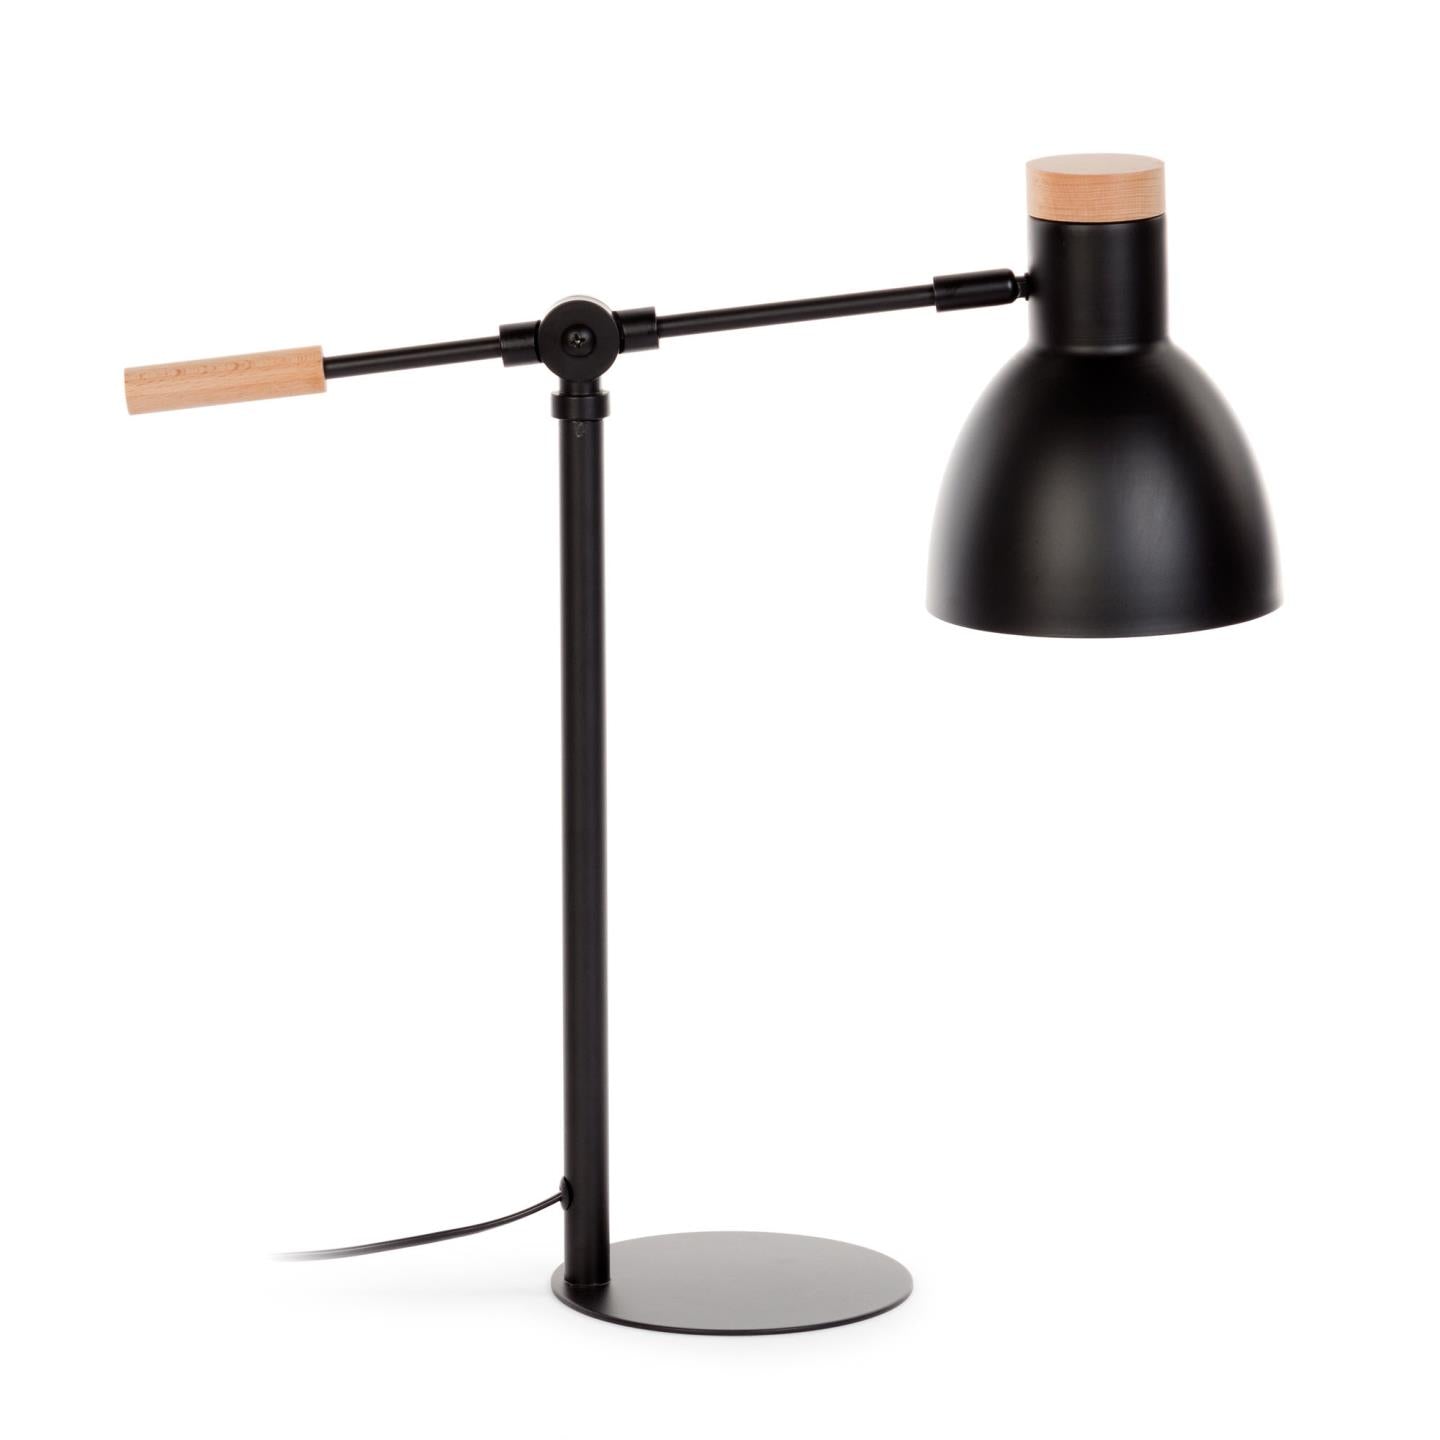 Tescarle table lamp in beech wood and steel with black finish